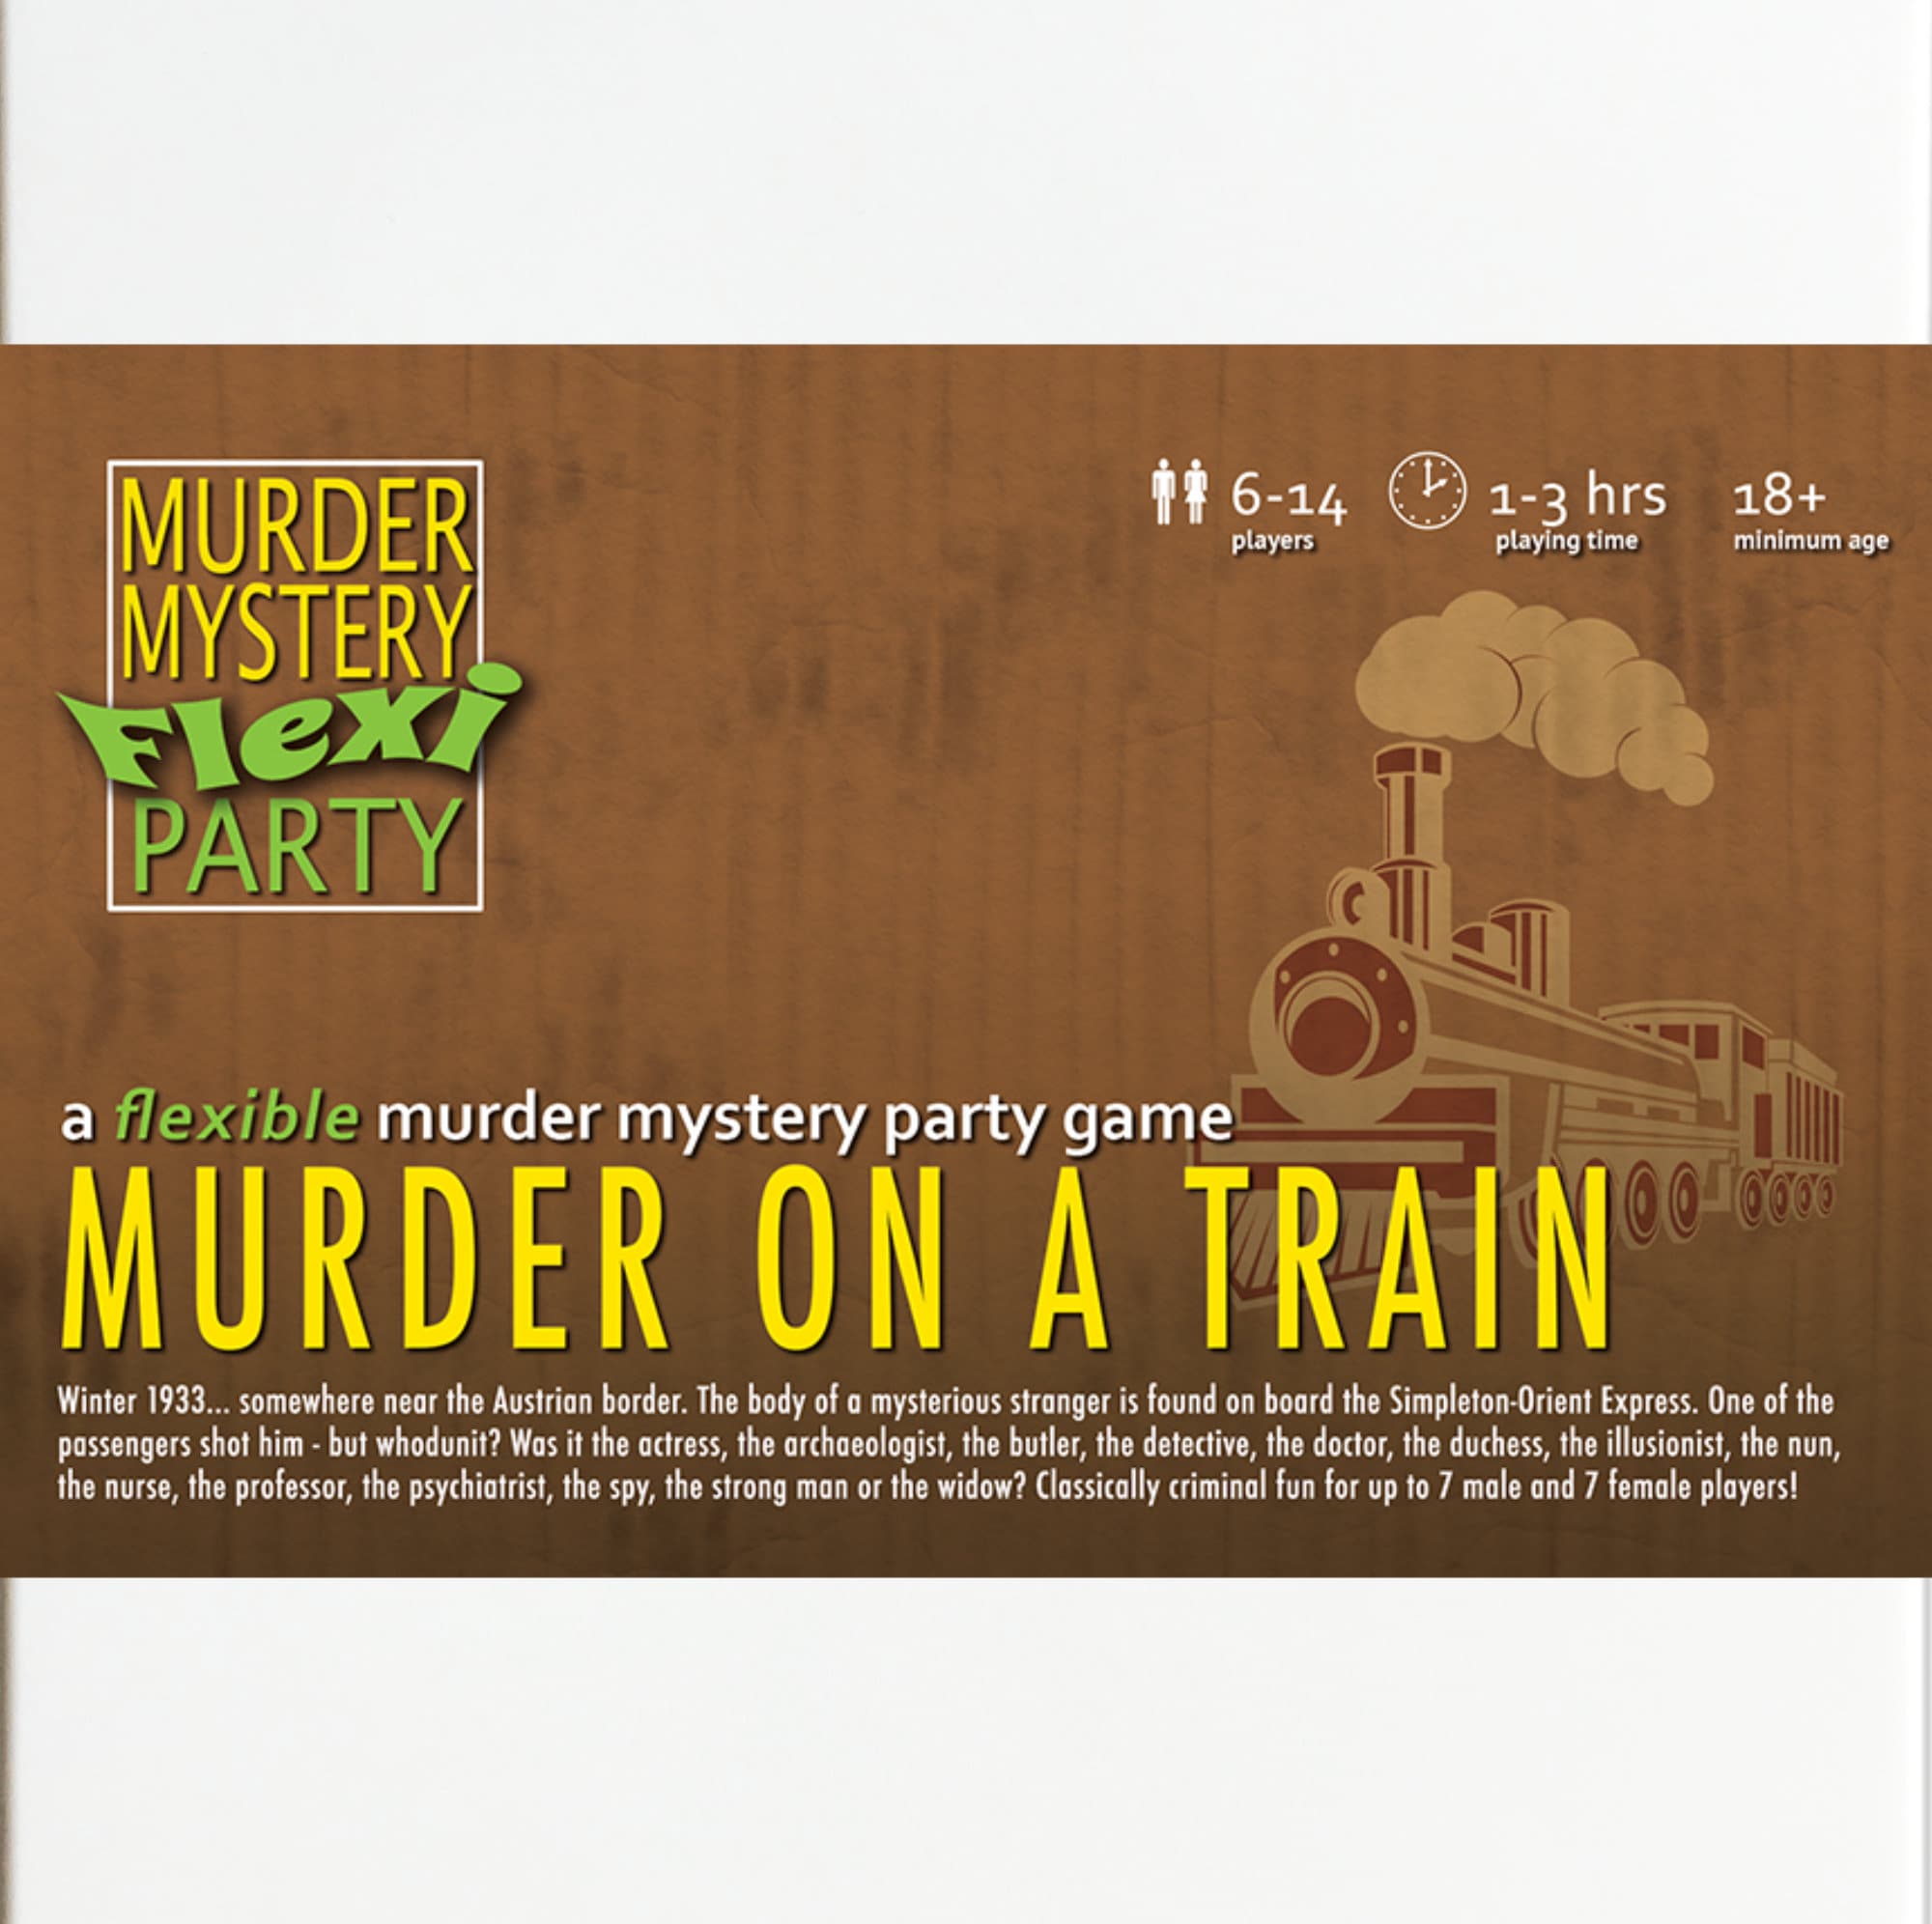 Whodunnit murder mystery arrives in April